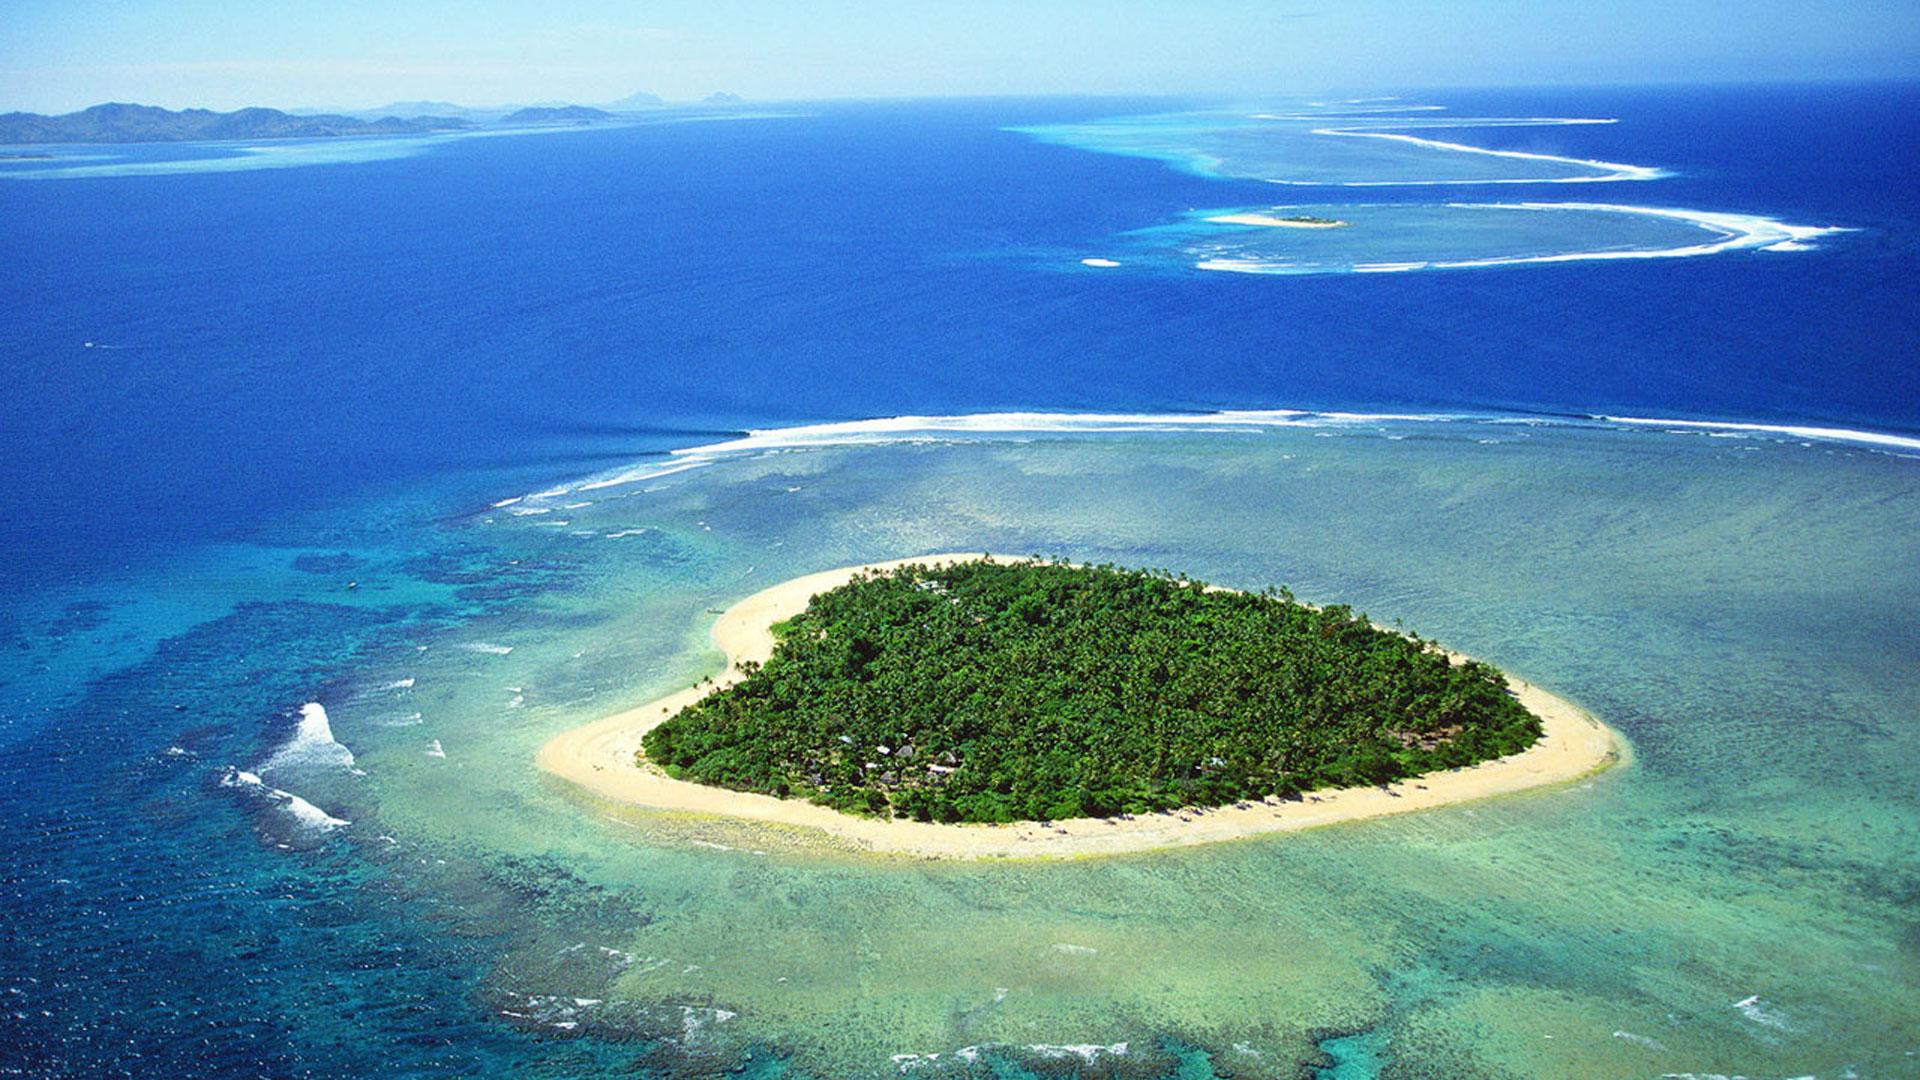 This is the island of Tavarua in Fiji, five miles by boat from the main island of Viti Levu. It is 29 acres in size and surrounded by a coral reef.